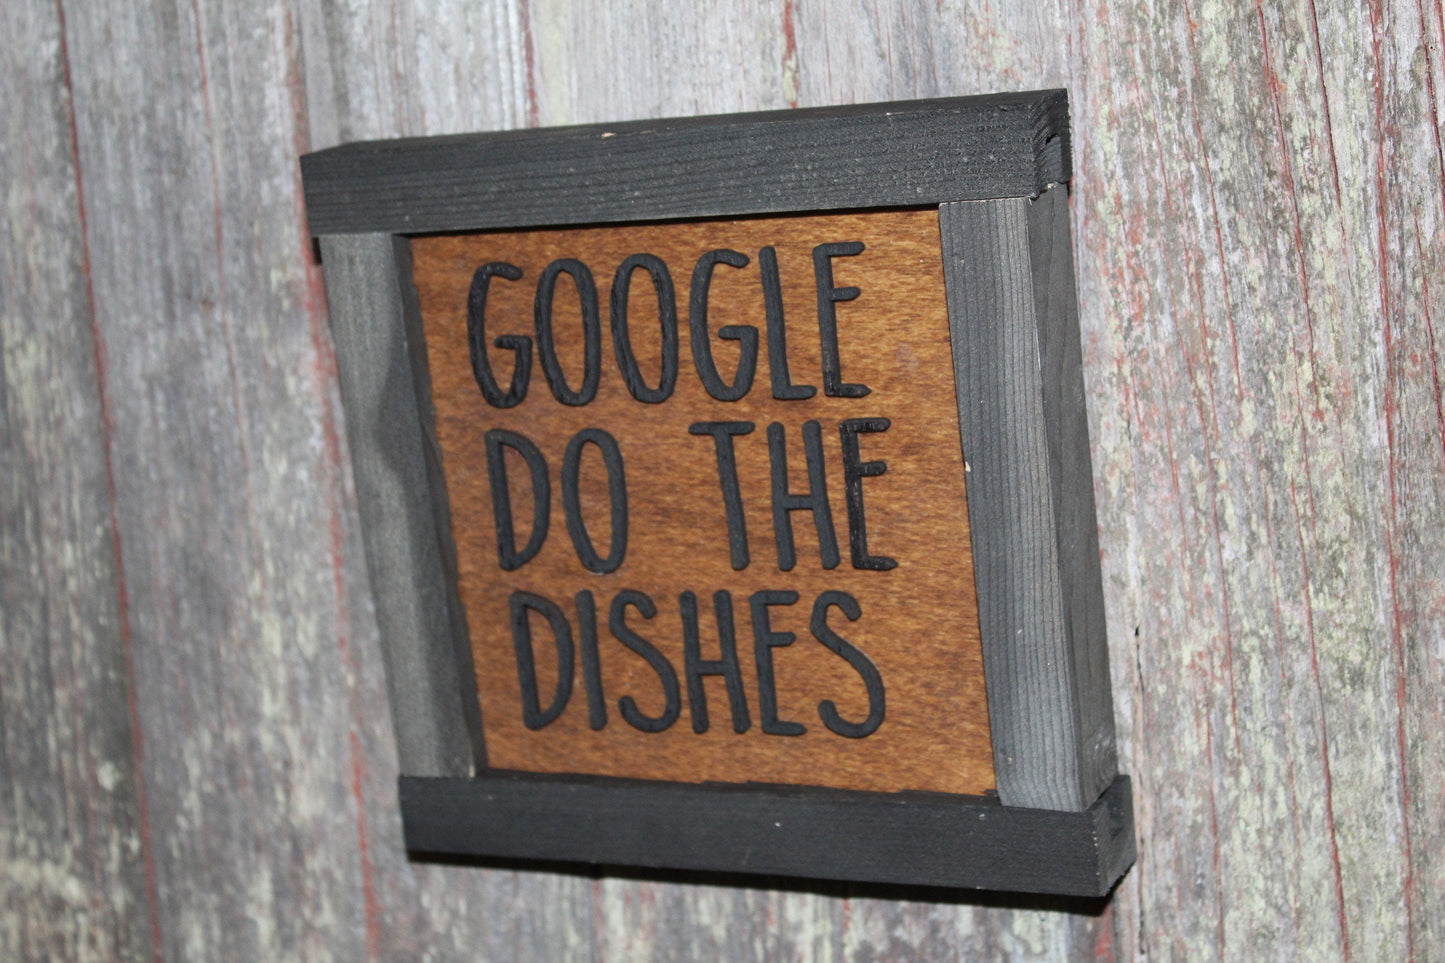 Google Do The Dishes Silly Wood Sign 3D Raised Text Goofy Joke Primitive Wall Decor Cabin Wall Hanging Art College Dorm Decor Housework